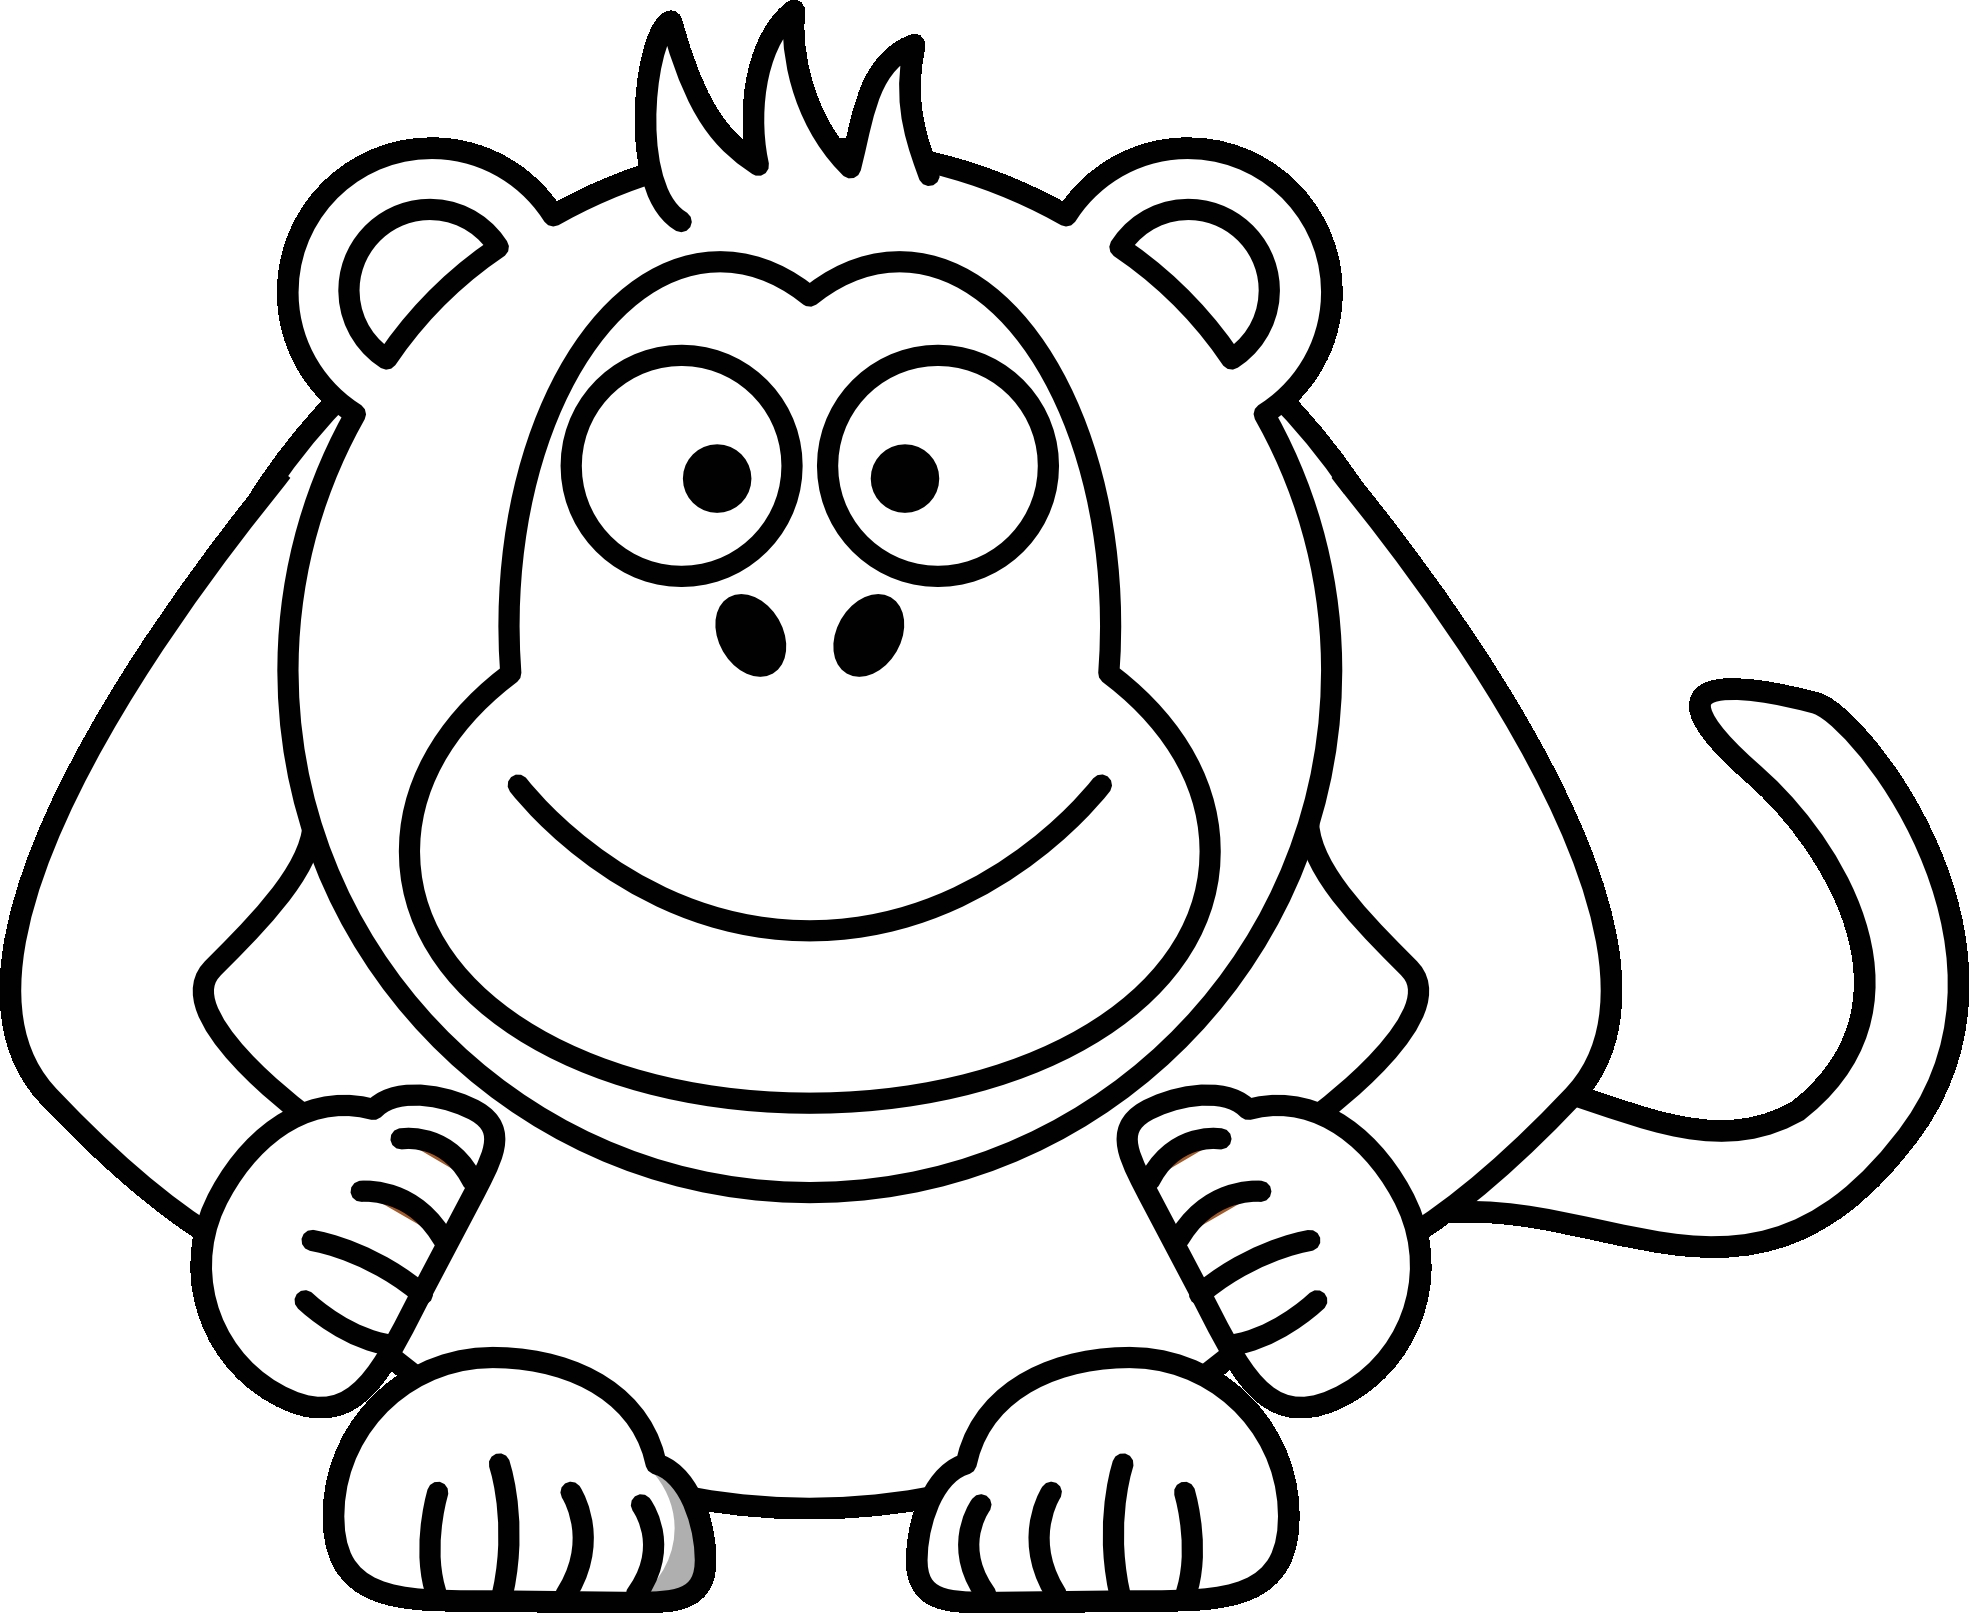 Cartoon Monkey Drawings - Drawing And Sketches